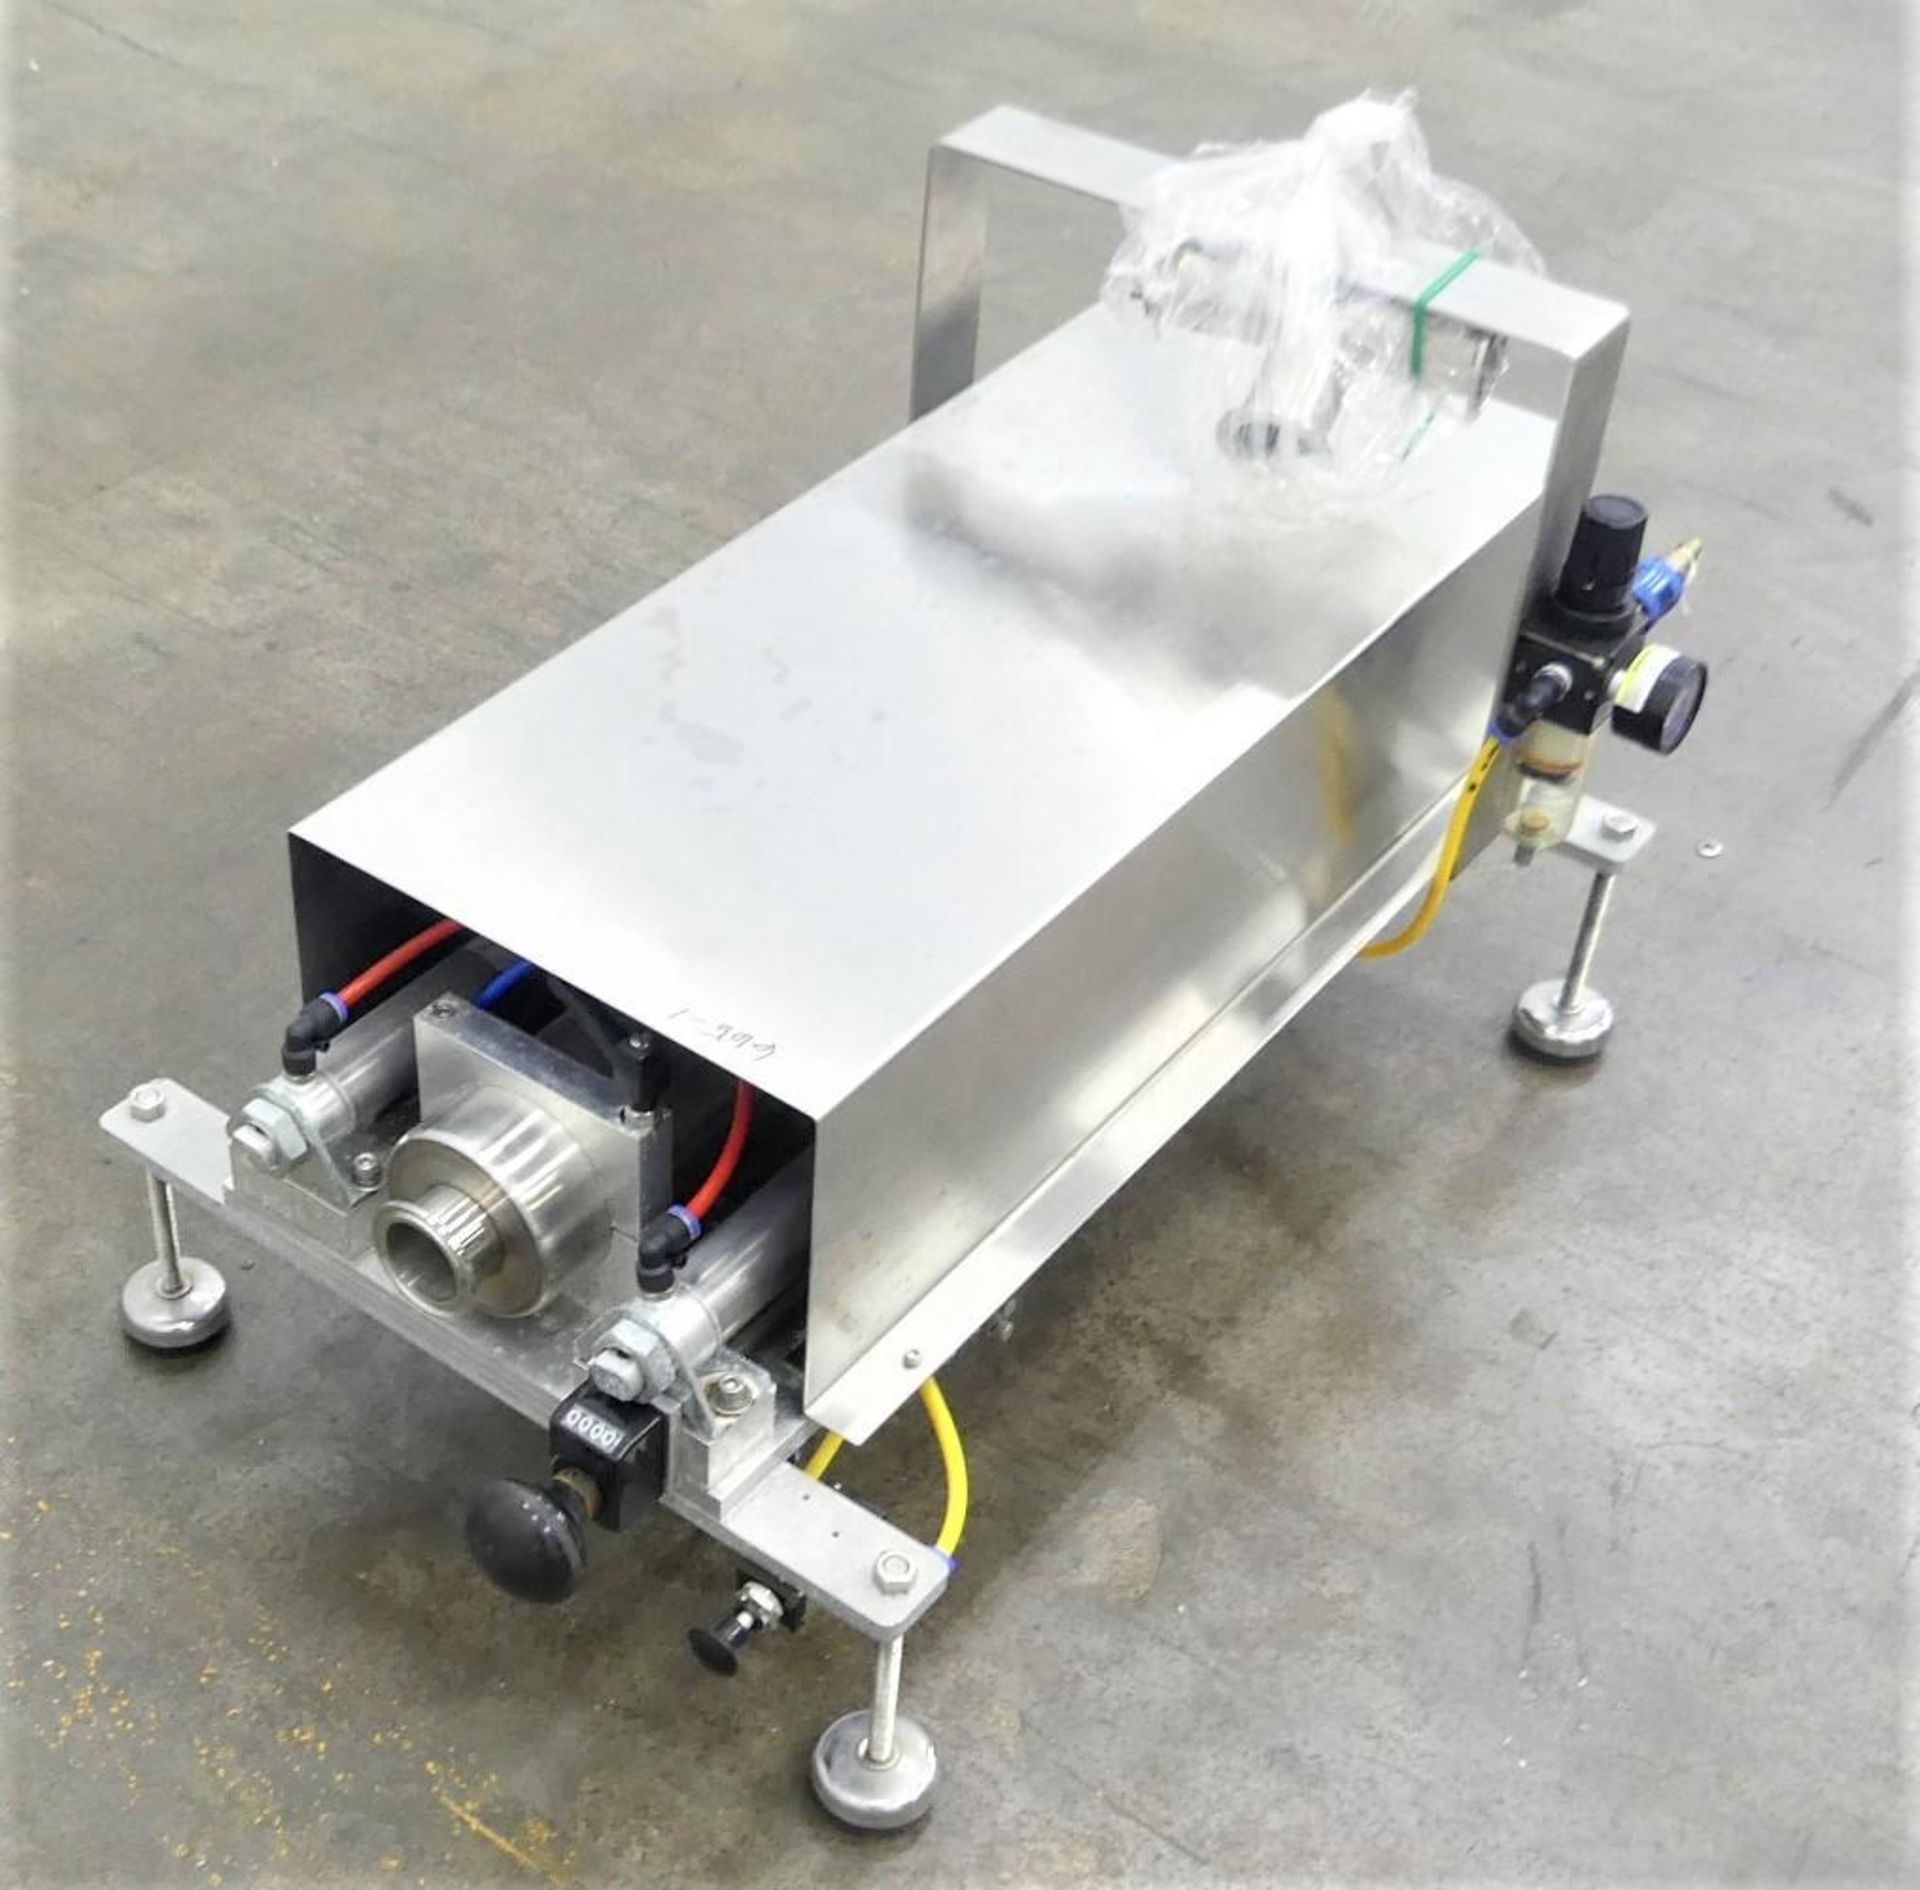 Accutek Tabletop Piston Filler with Valve - Image 2 of 7